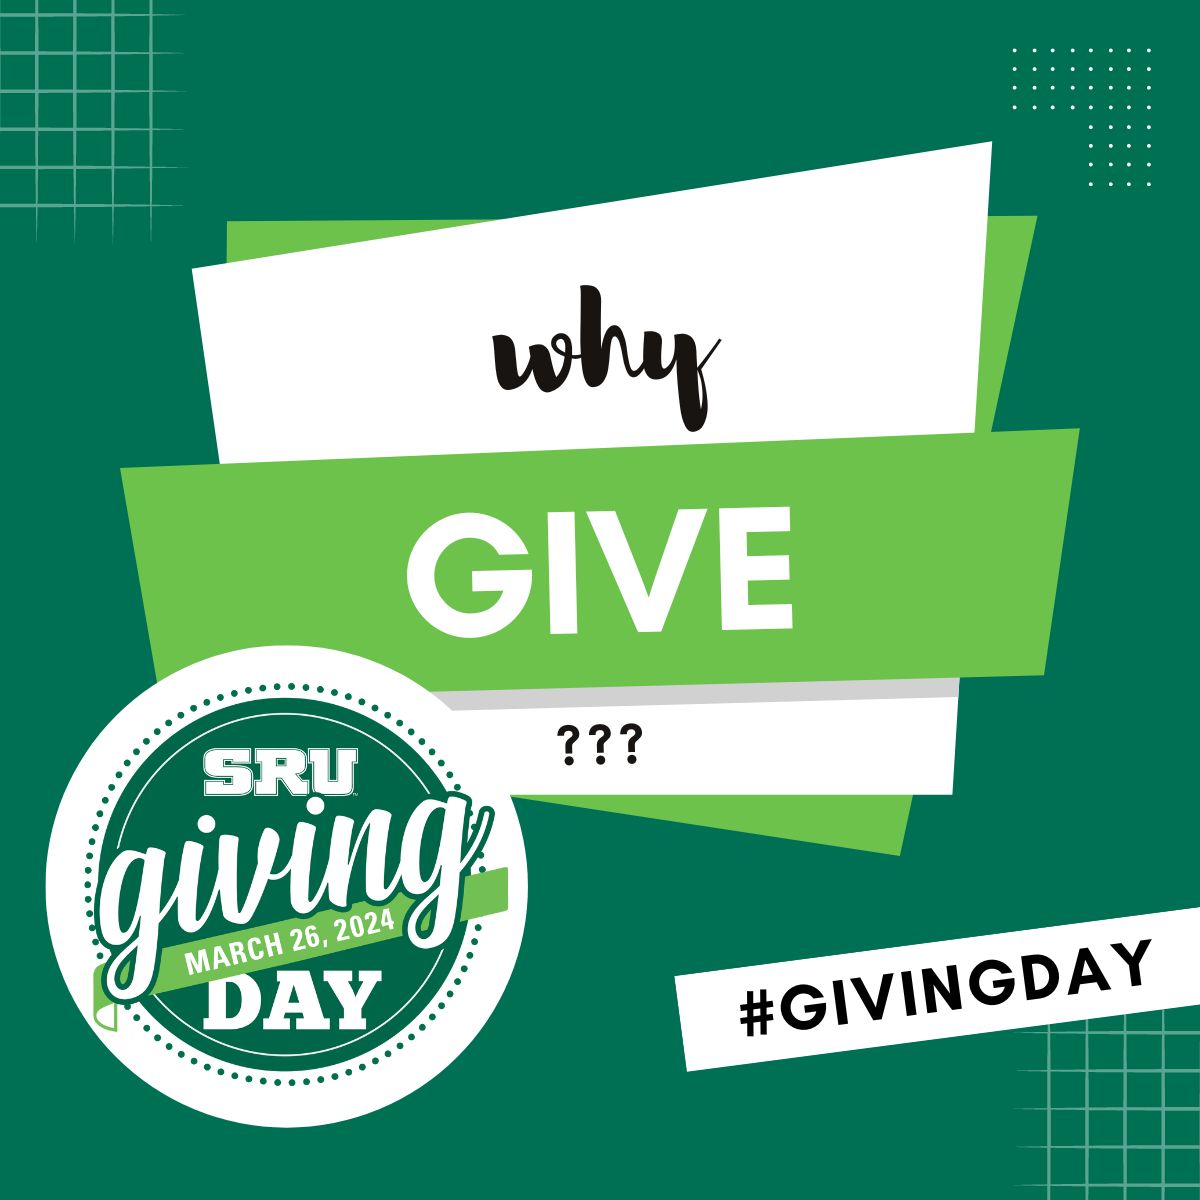 This #GivingDay, #InvestInOurFuture because #TodaysStudents are #TomorrowsLeaders.

Don't miss your chance to show your support on March 26.

#TheRock #RockNation #RockPride #SRU #GoRock #UniversityAdvancement #Advancement #SupportOurStudents #InvestInOurFuture #EveryGiftCounts